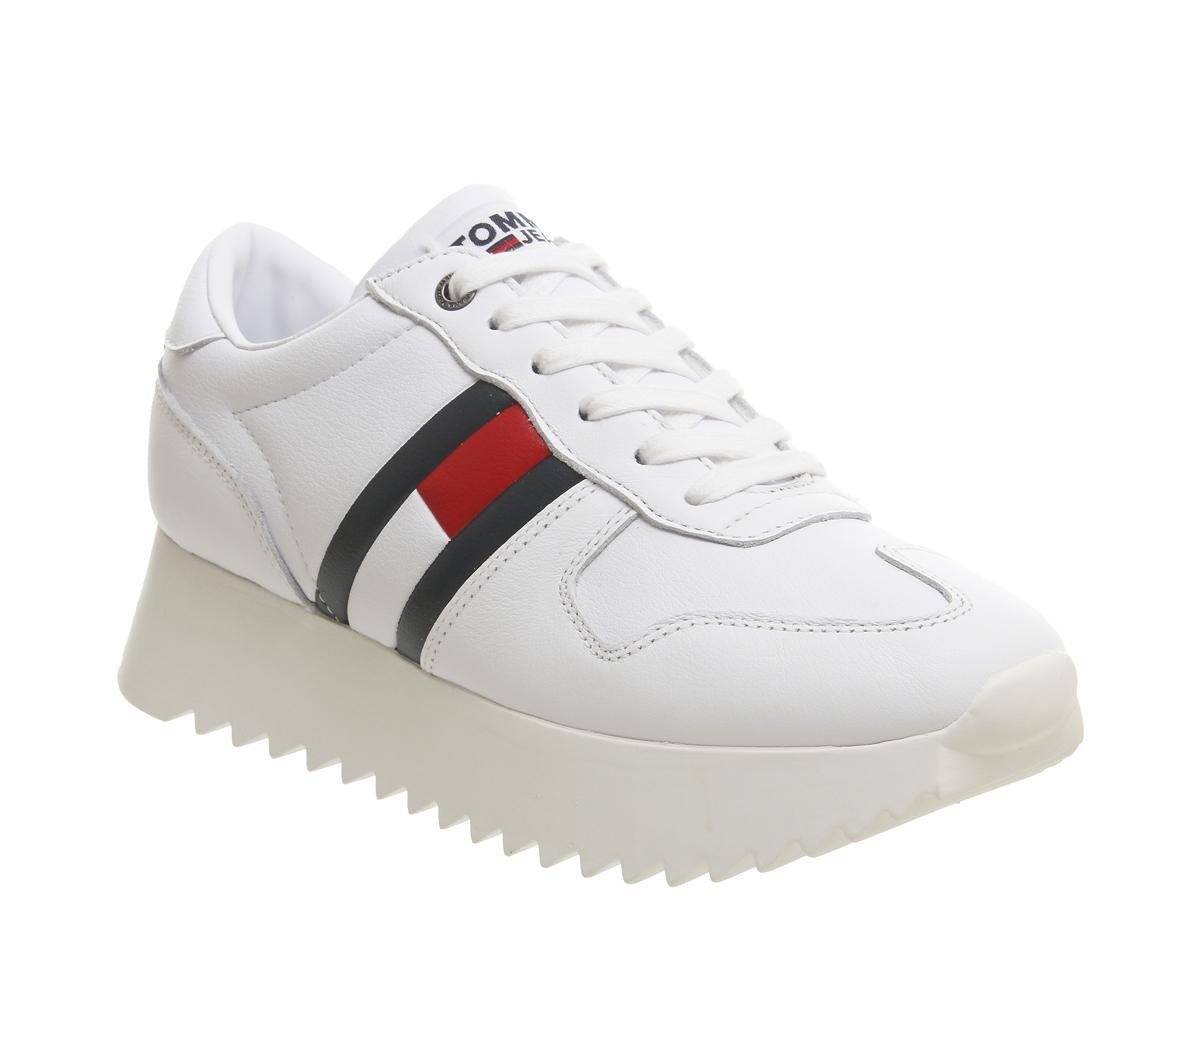 tommy hilfiger high cleated sneakers